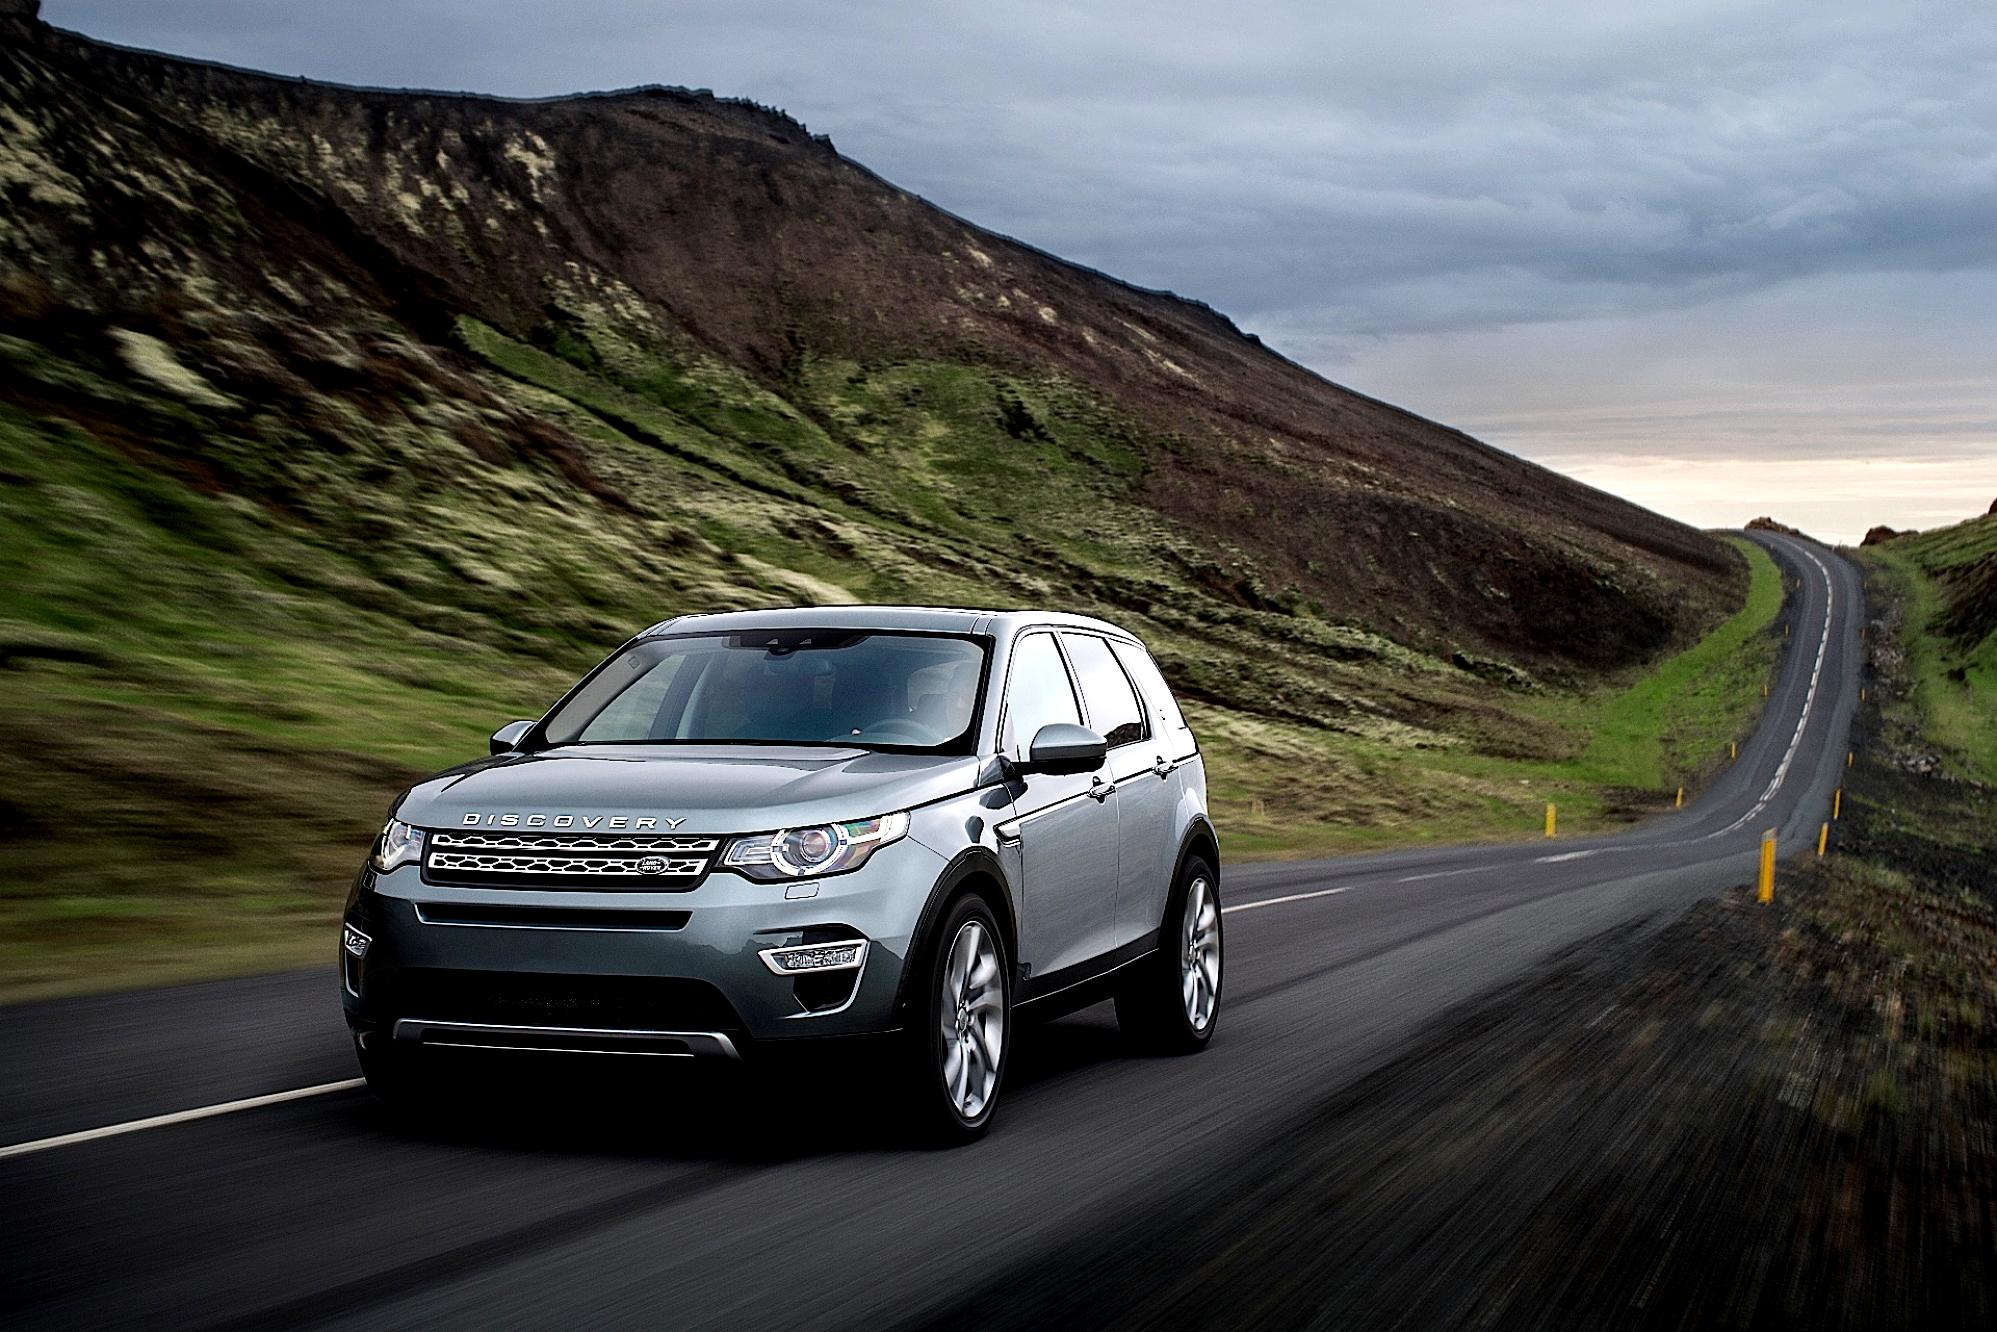 Land Rover Discovery Sport 2014 #20